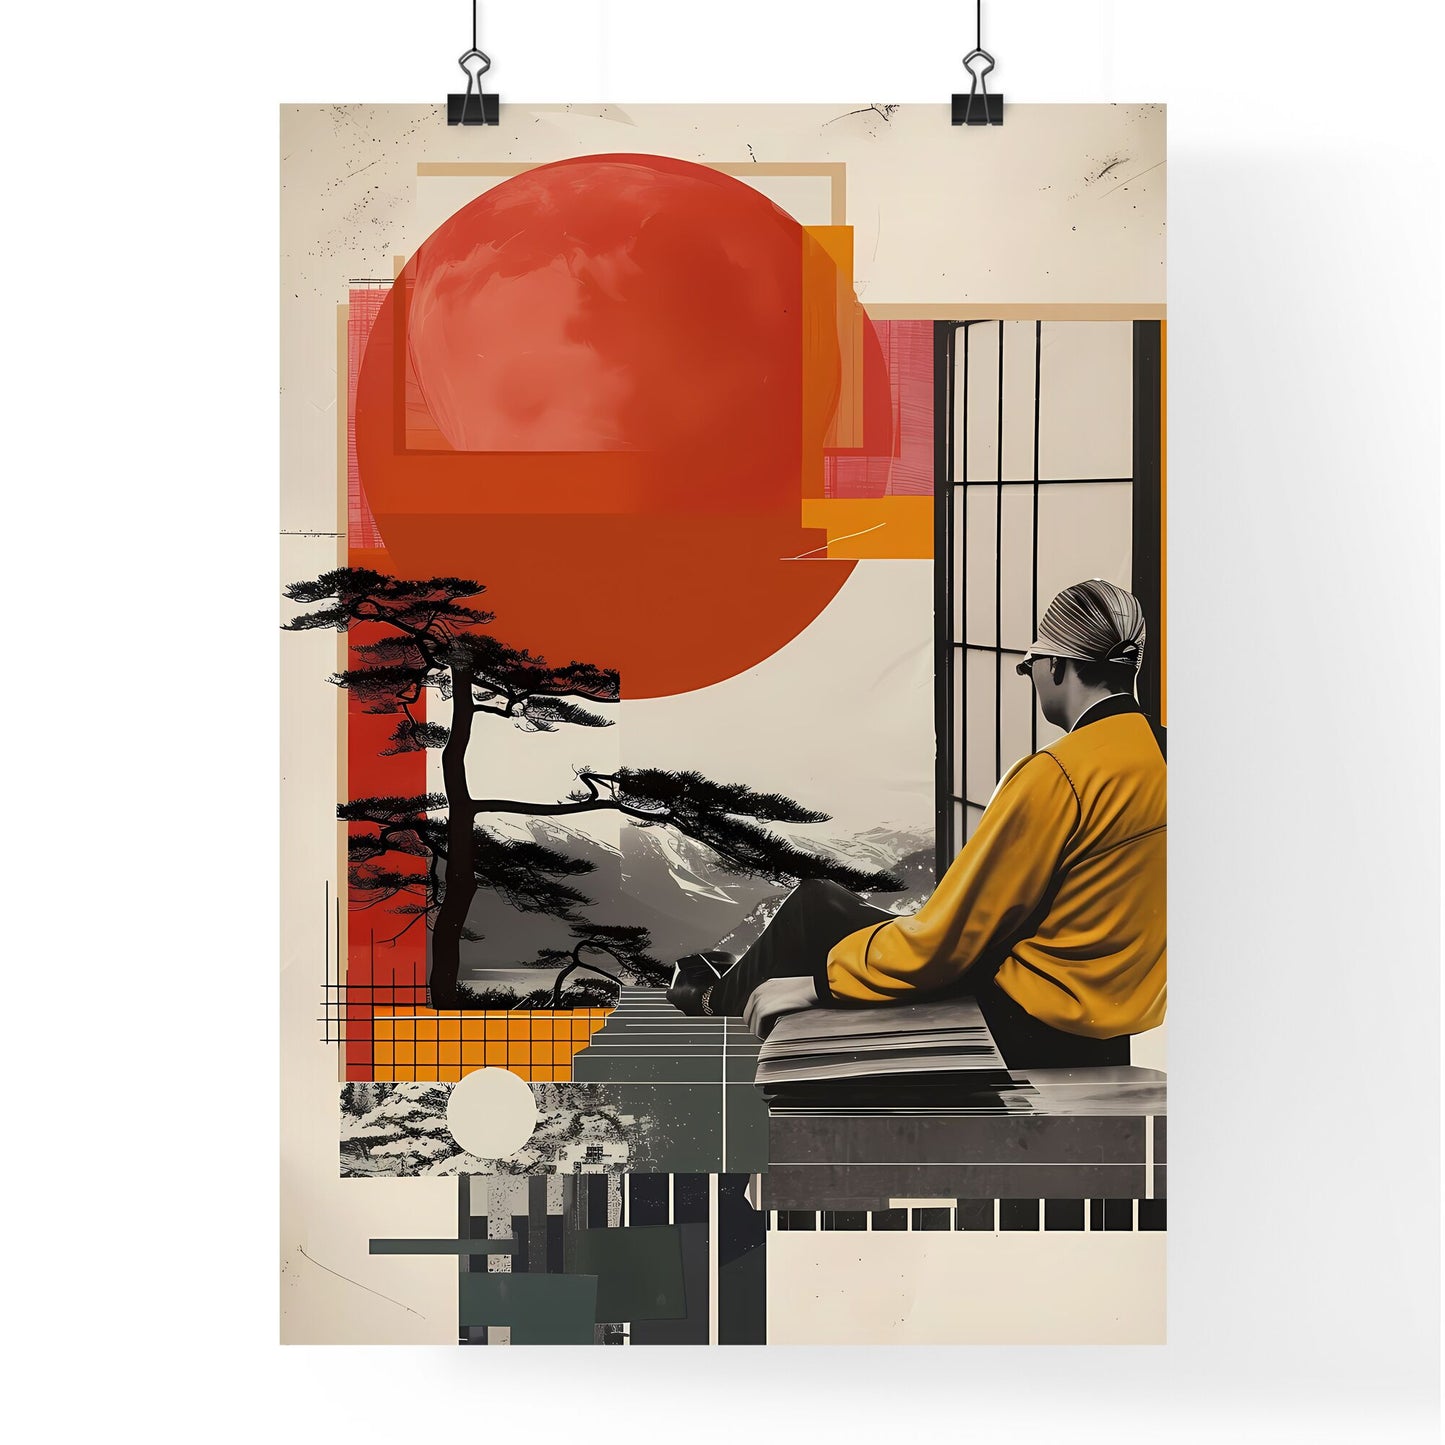 Art Deco Conceptual Collage: Japanese-Inspired Architecture, Window-Gazing Man, Vibrant Painting Default Title